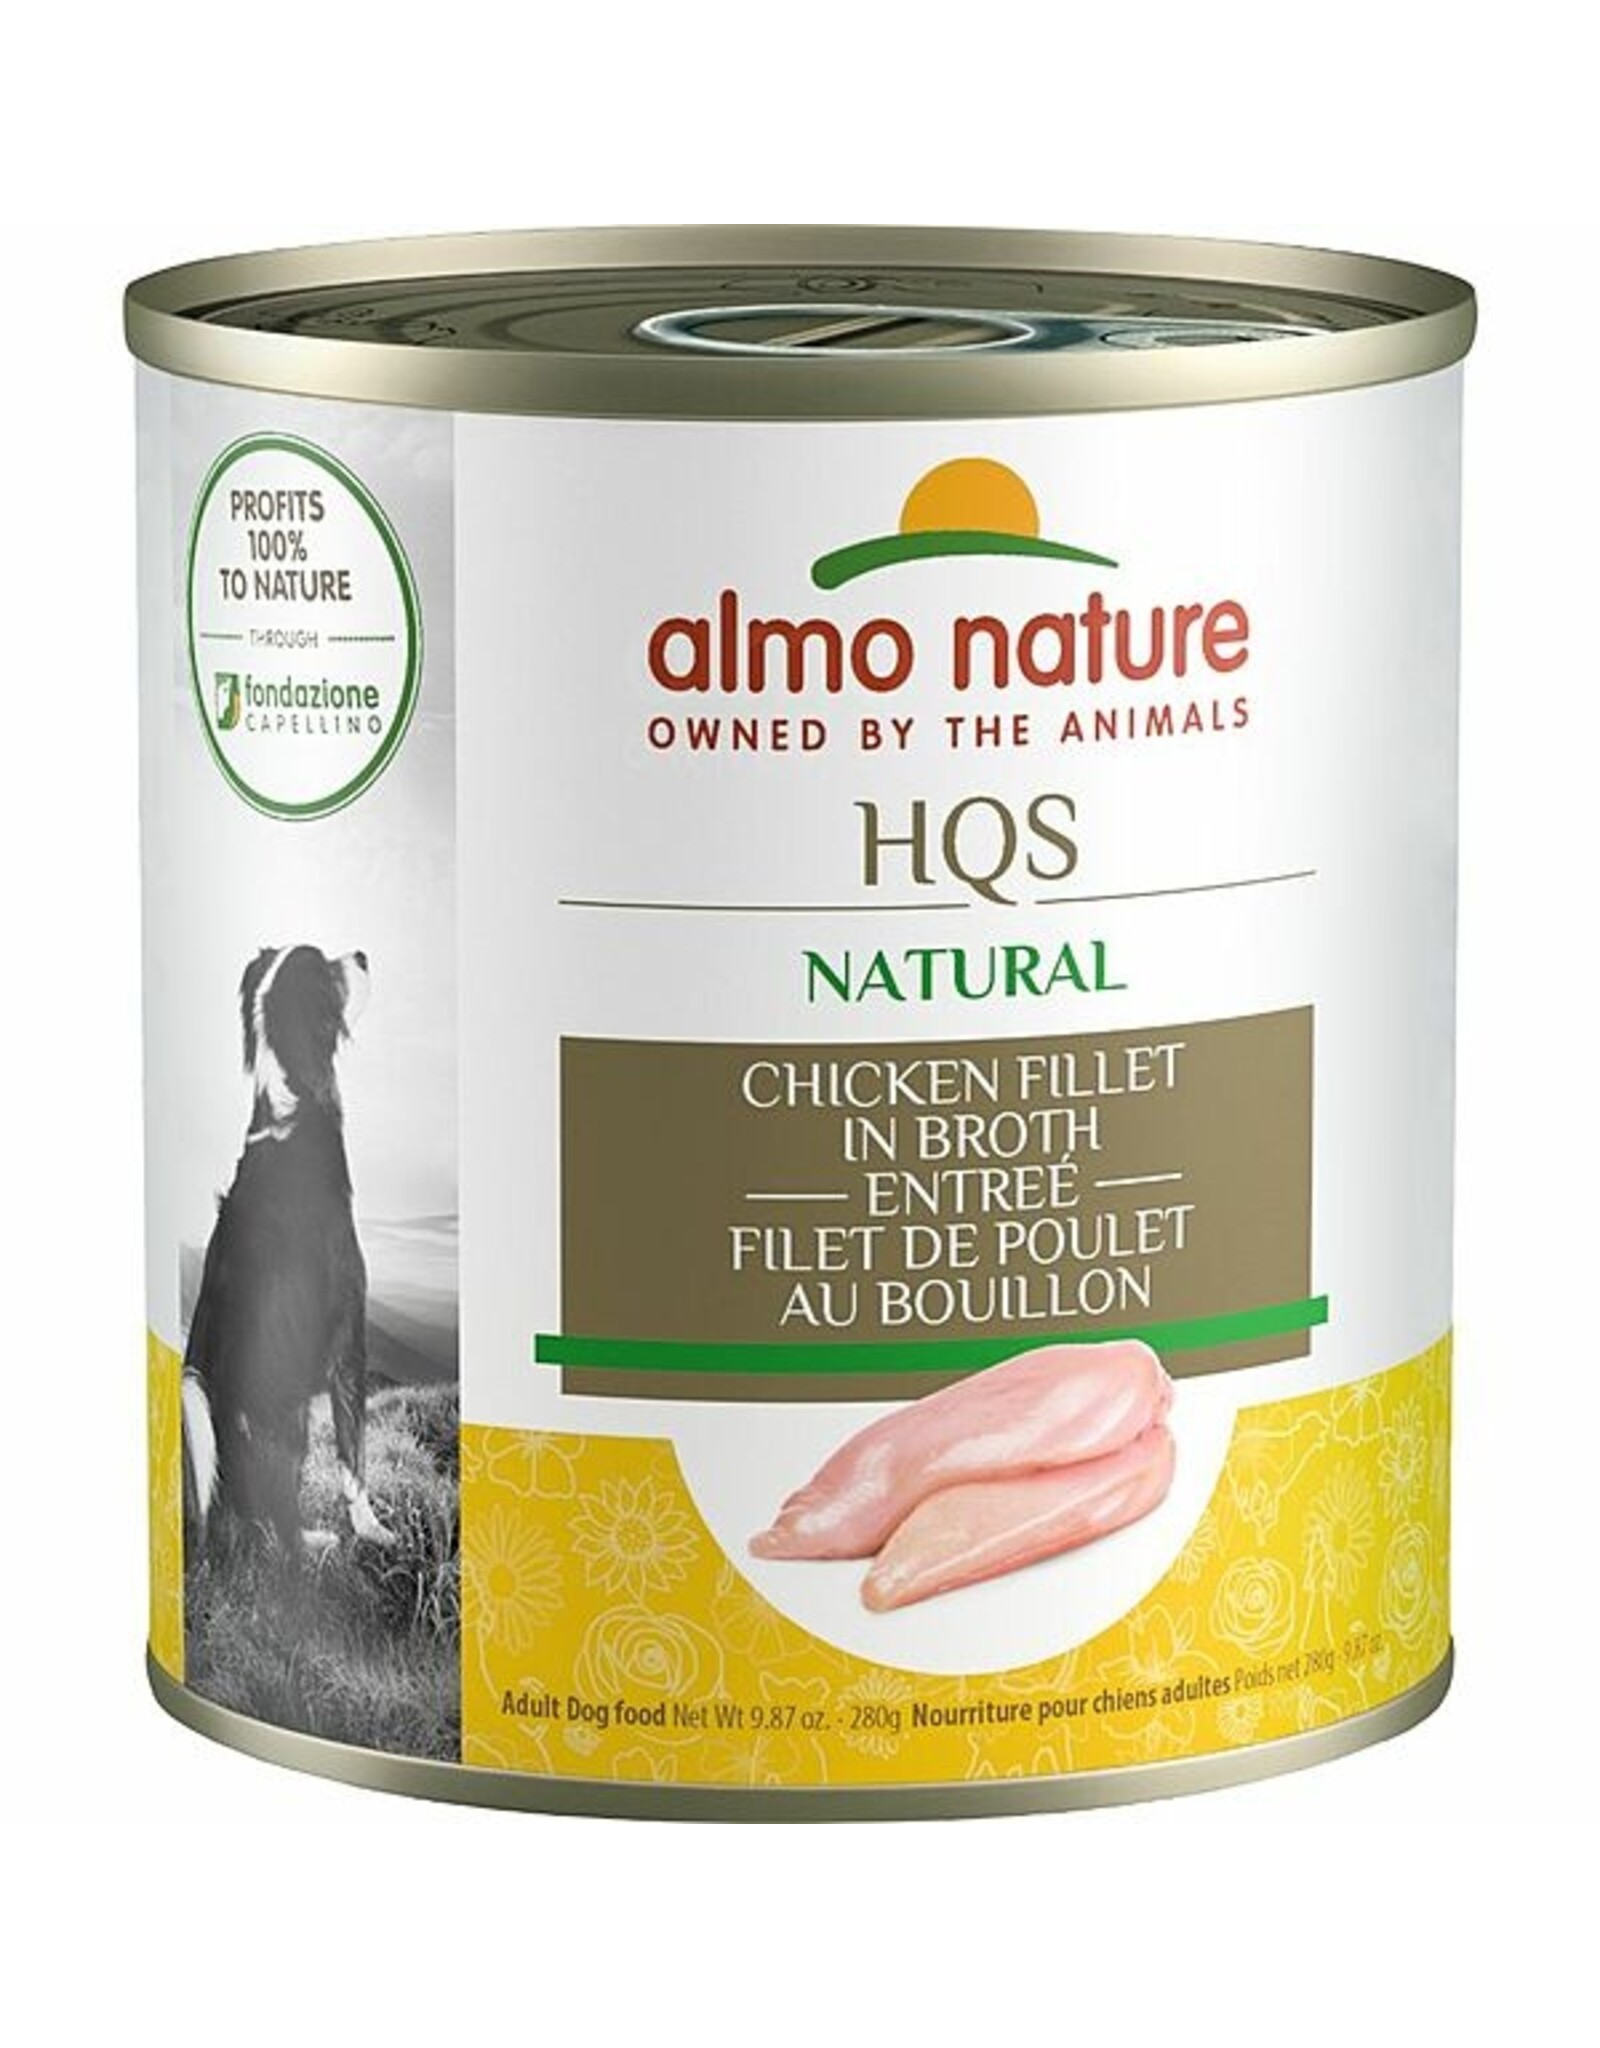 Almo Nature Chicken Fillet Entree in Broth single